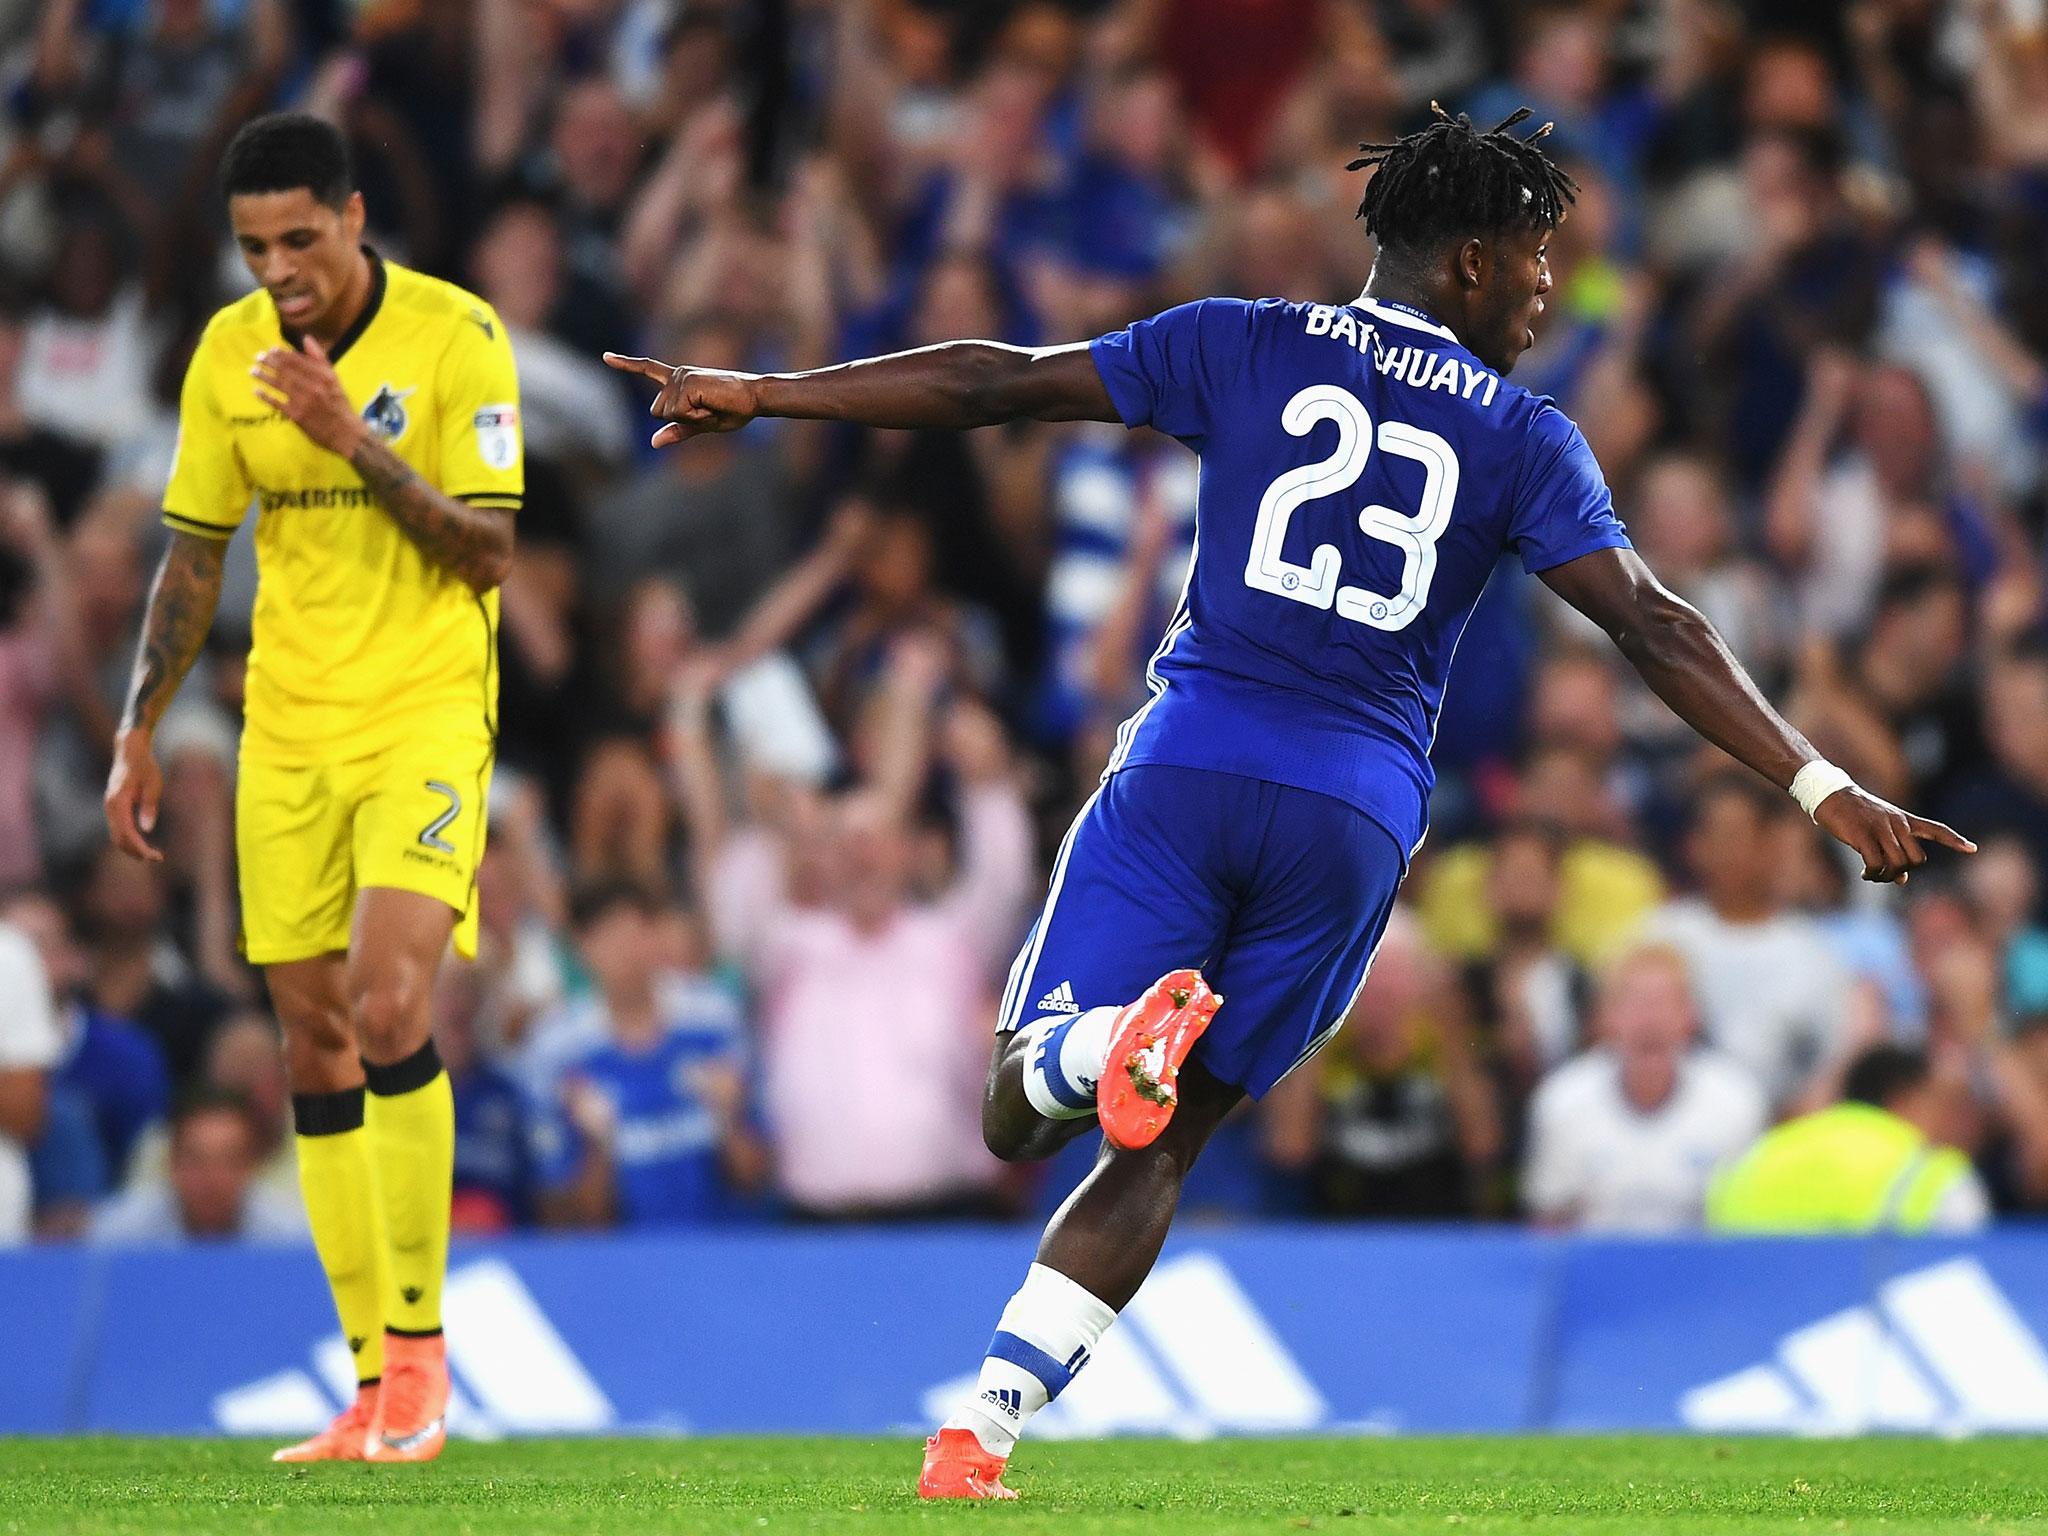 Chelsea’s Michy Batshuayi opened the scoring against League One Bristol Rovers